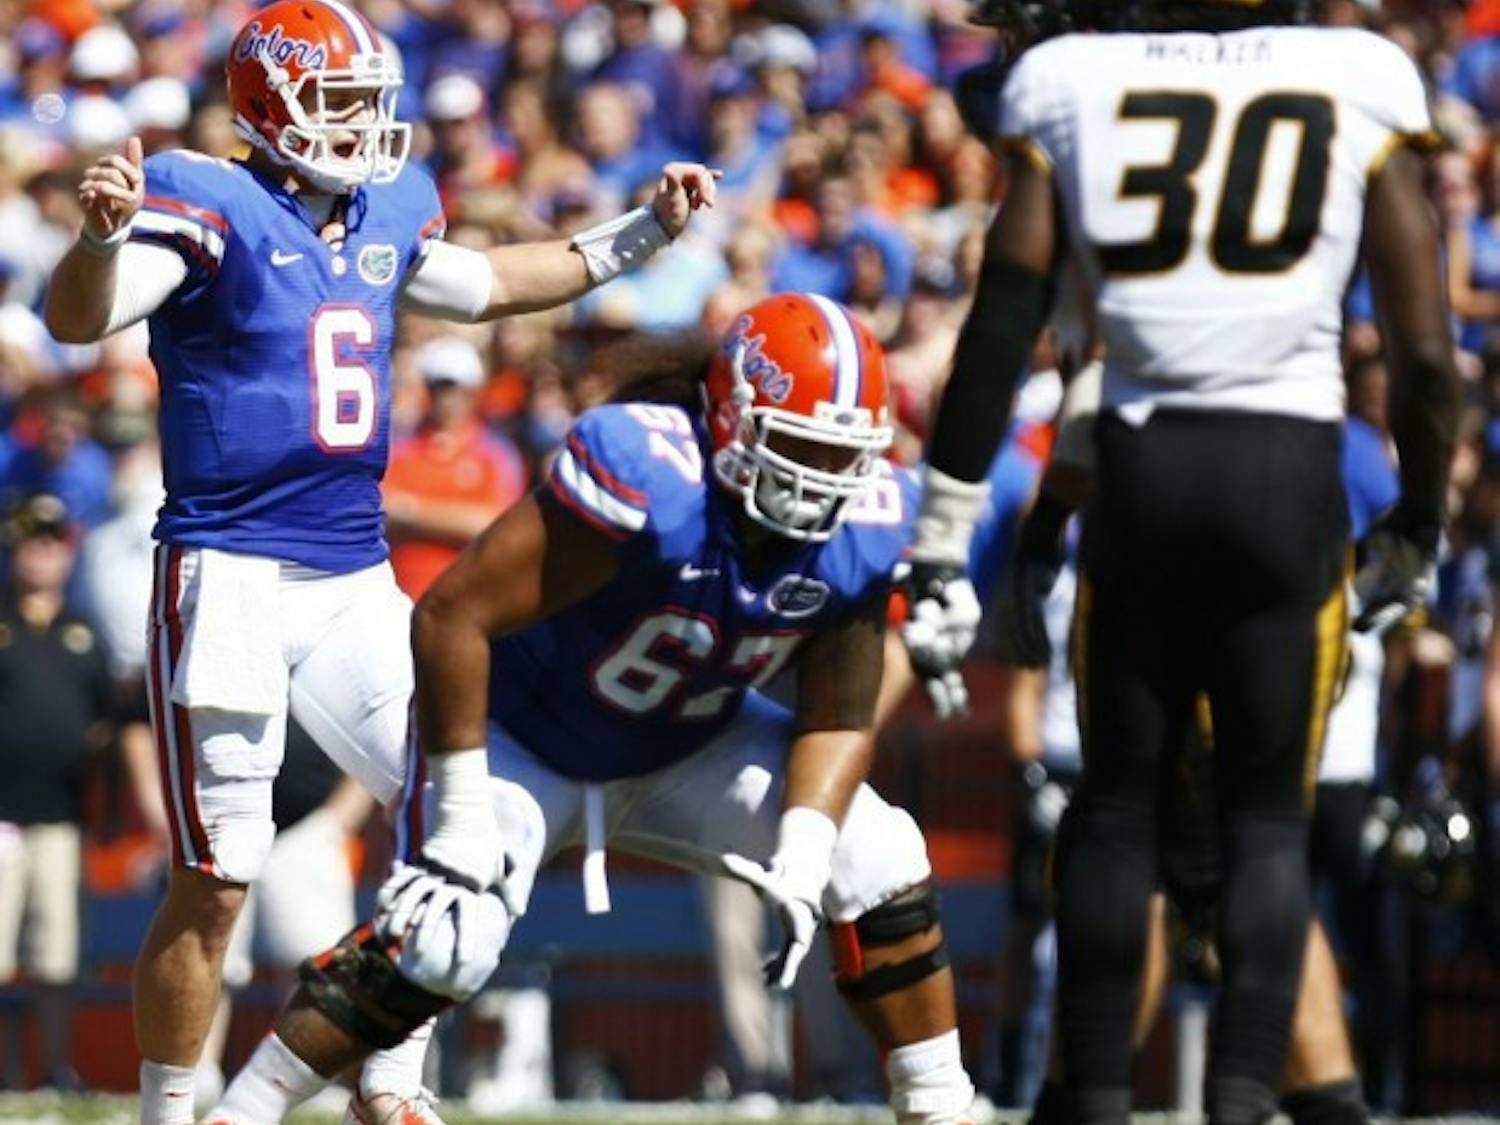 Quarterback Jeff Driskel signals to the Gators’ offense in Florida’s 14-7 win against Missouri on Saturday at Ben Hill Griffin Stadium. UF went to a hurry-up attack on its first two possessions.&nbsp;
